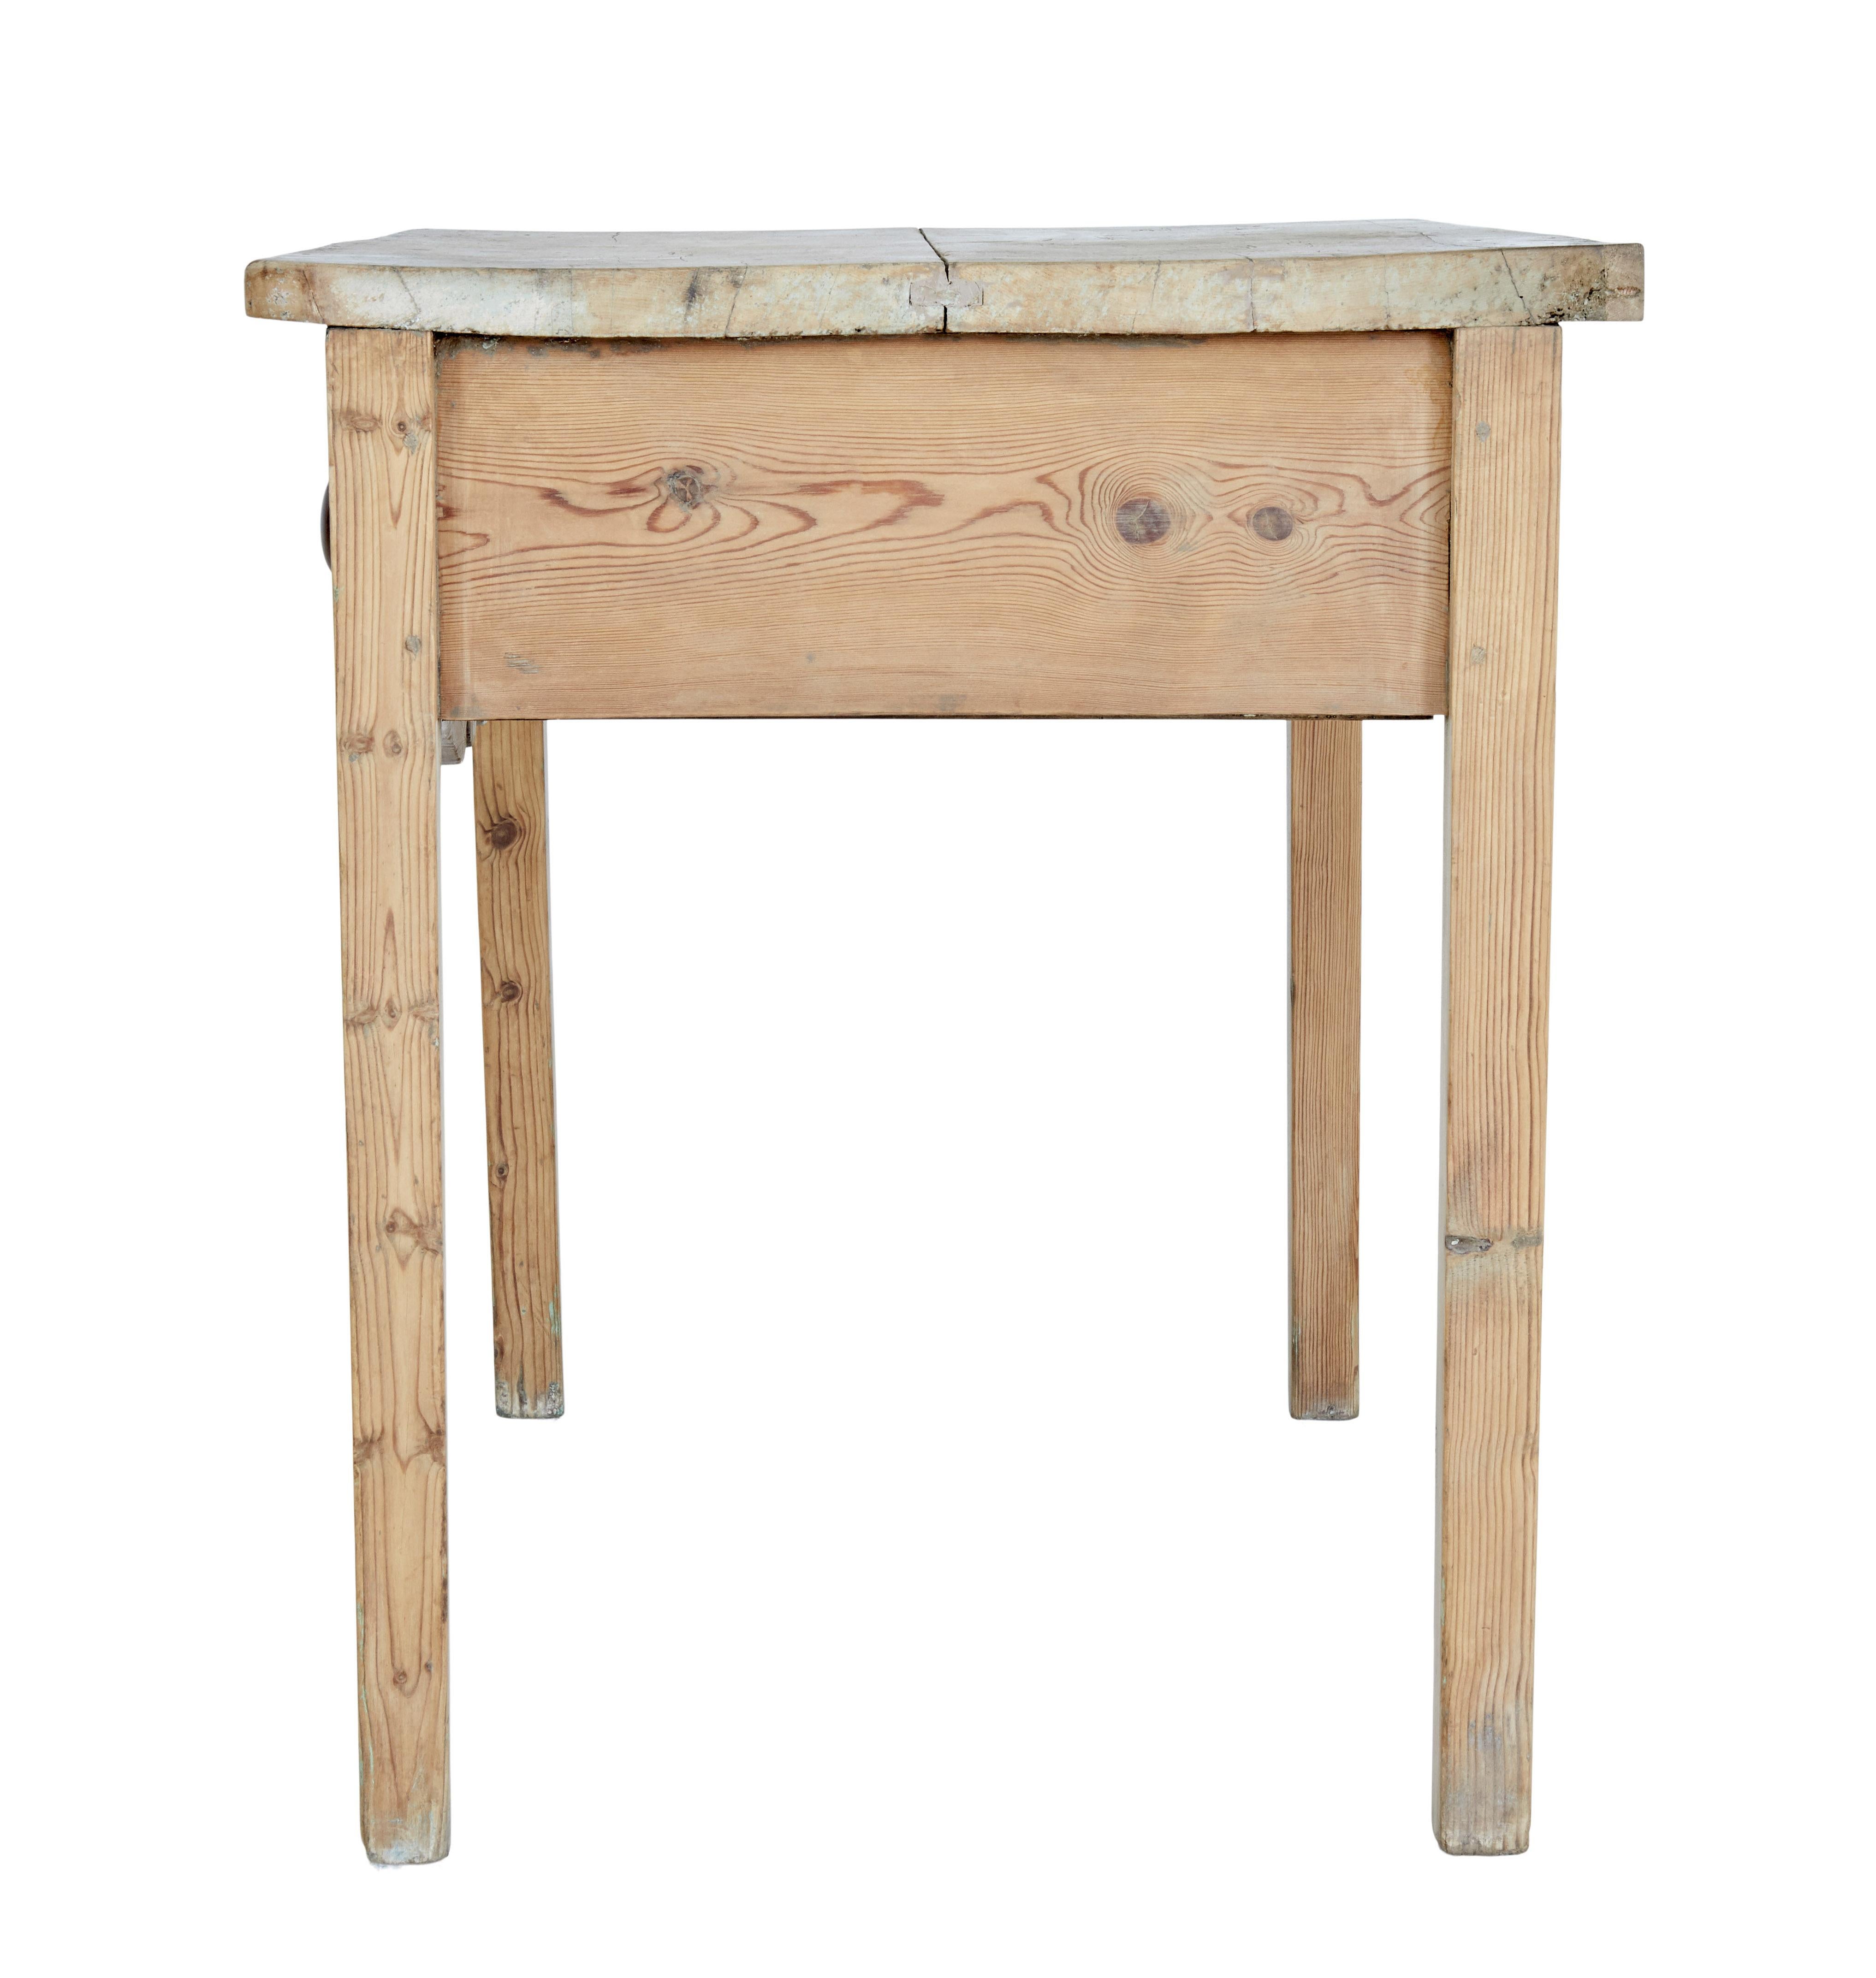 Rustic 19th Century Victorian Pine Kitchen Table 1